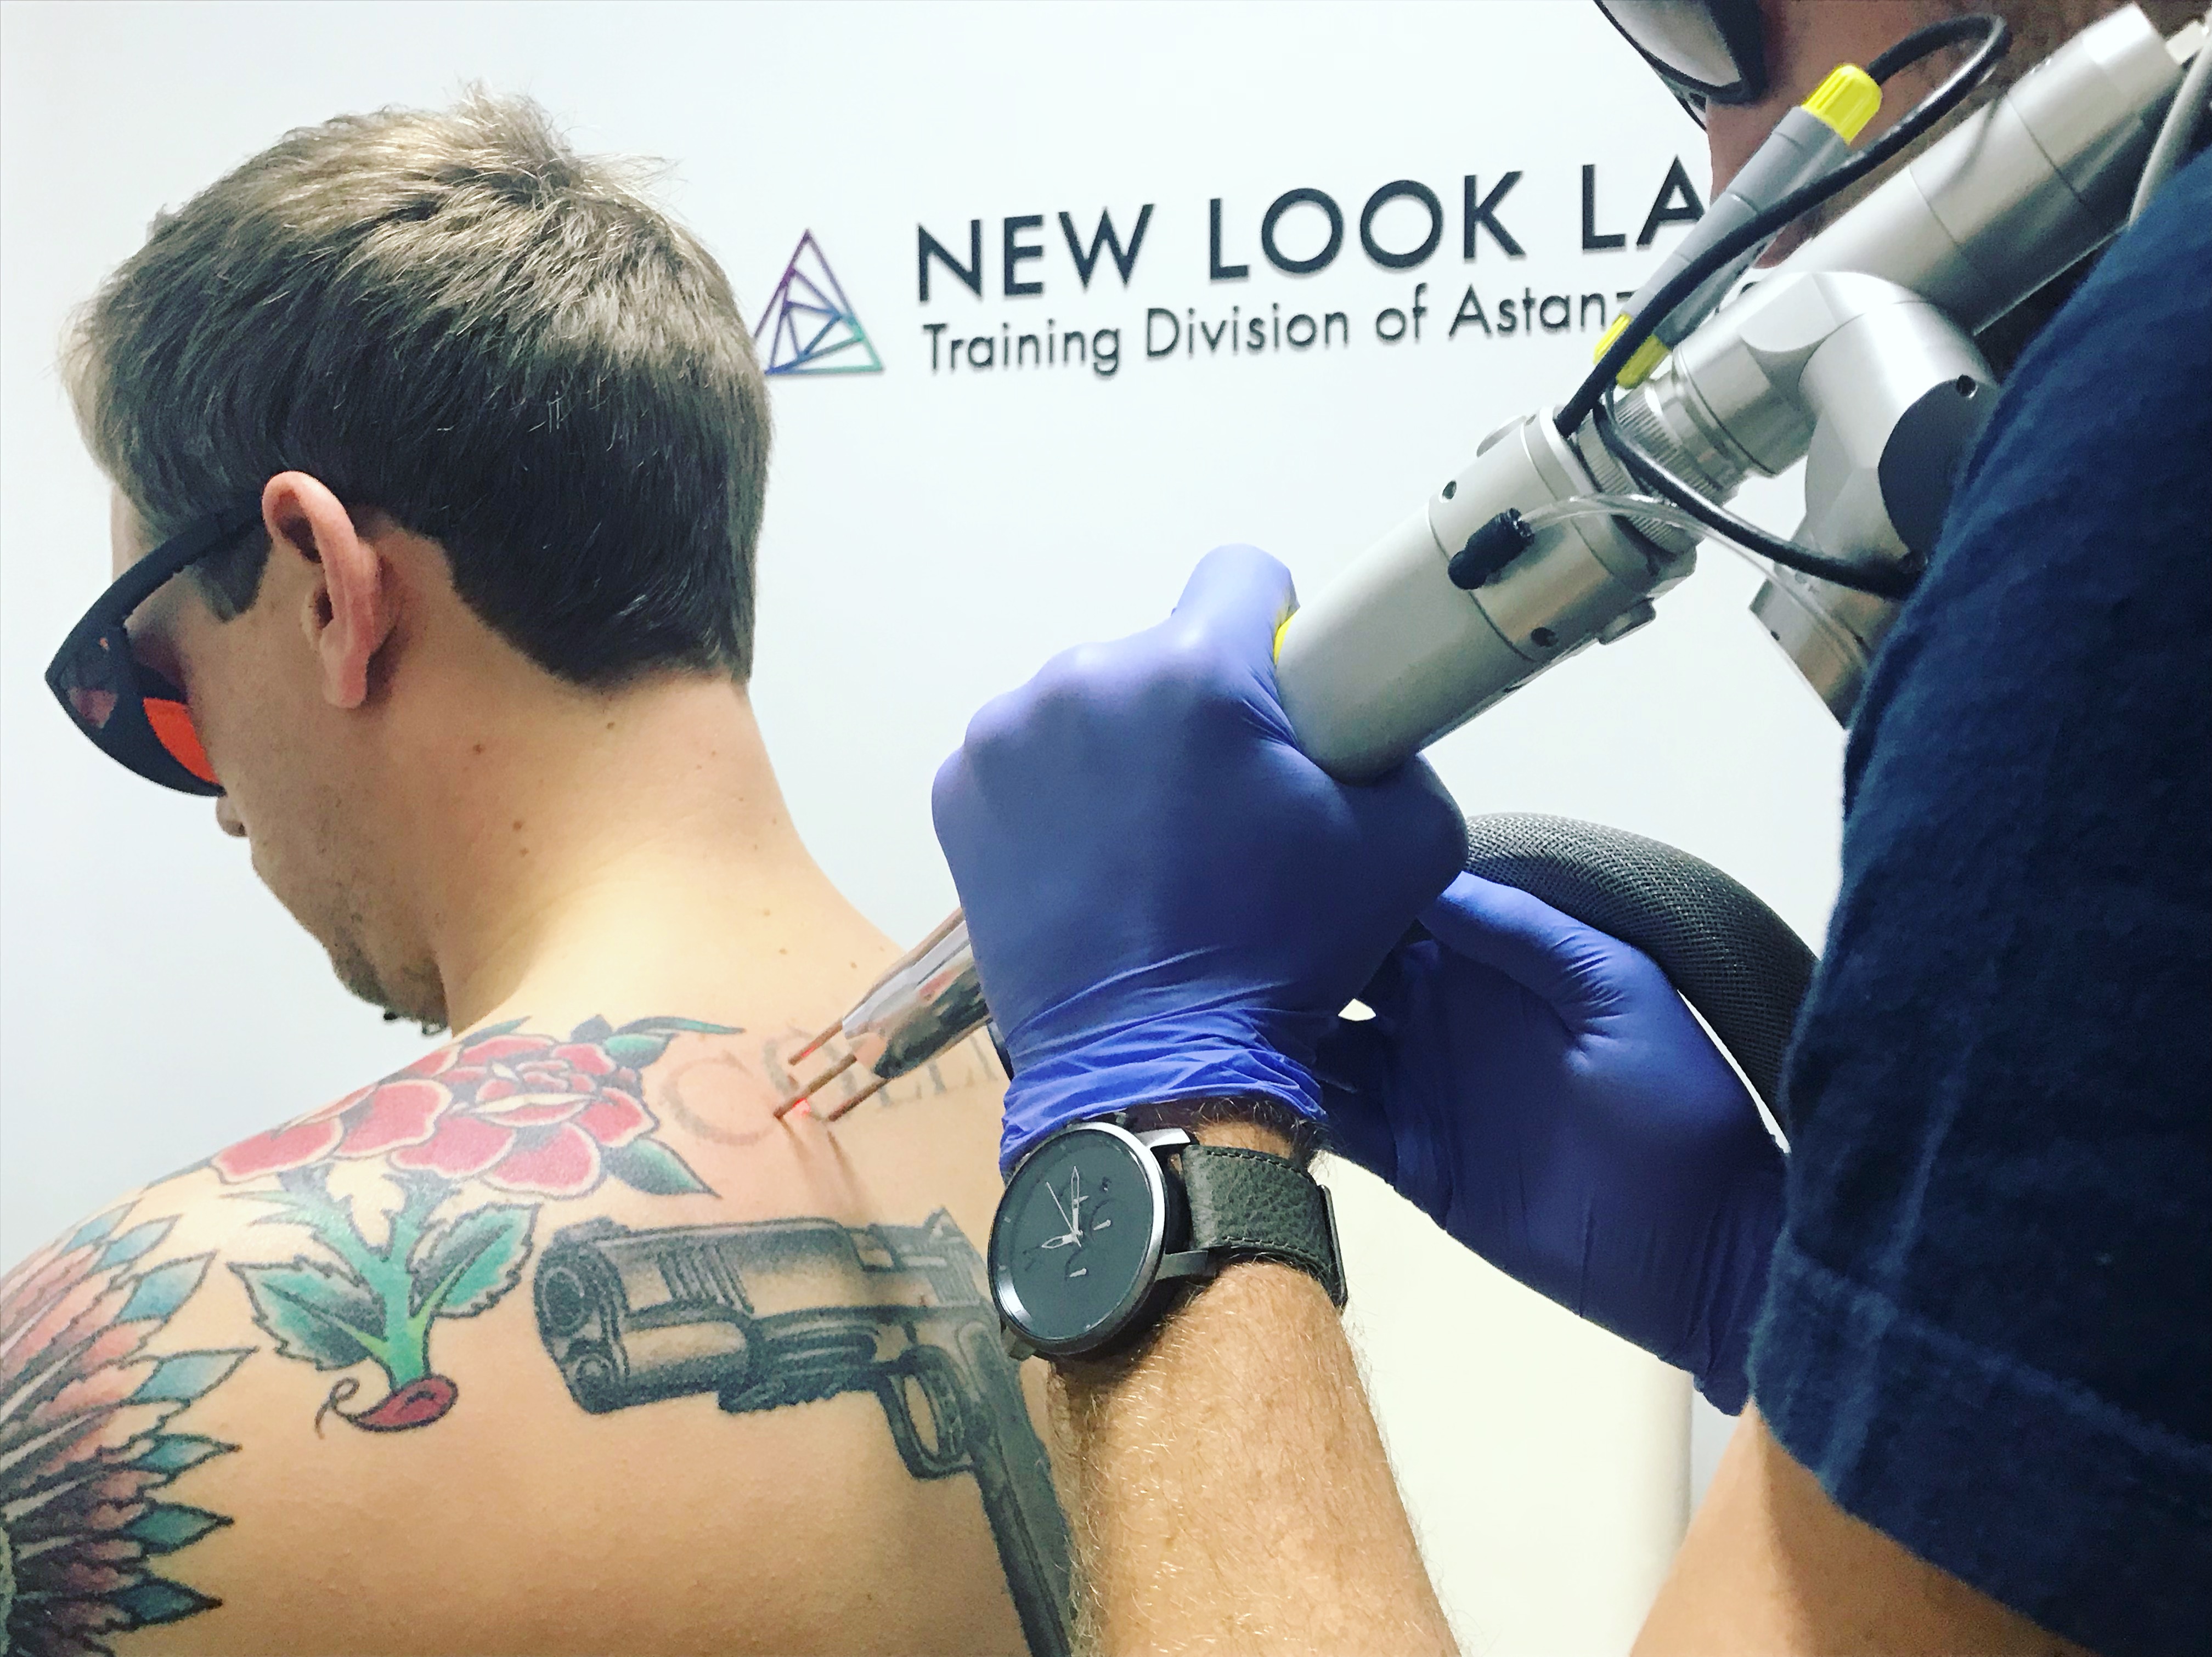 What to Expect at New Look Laser College Training